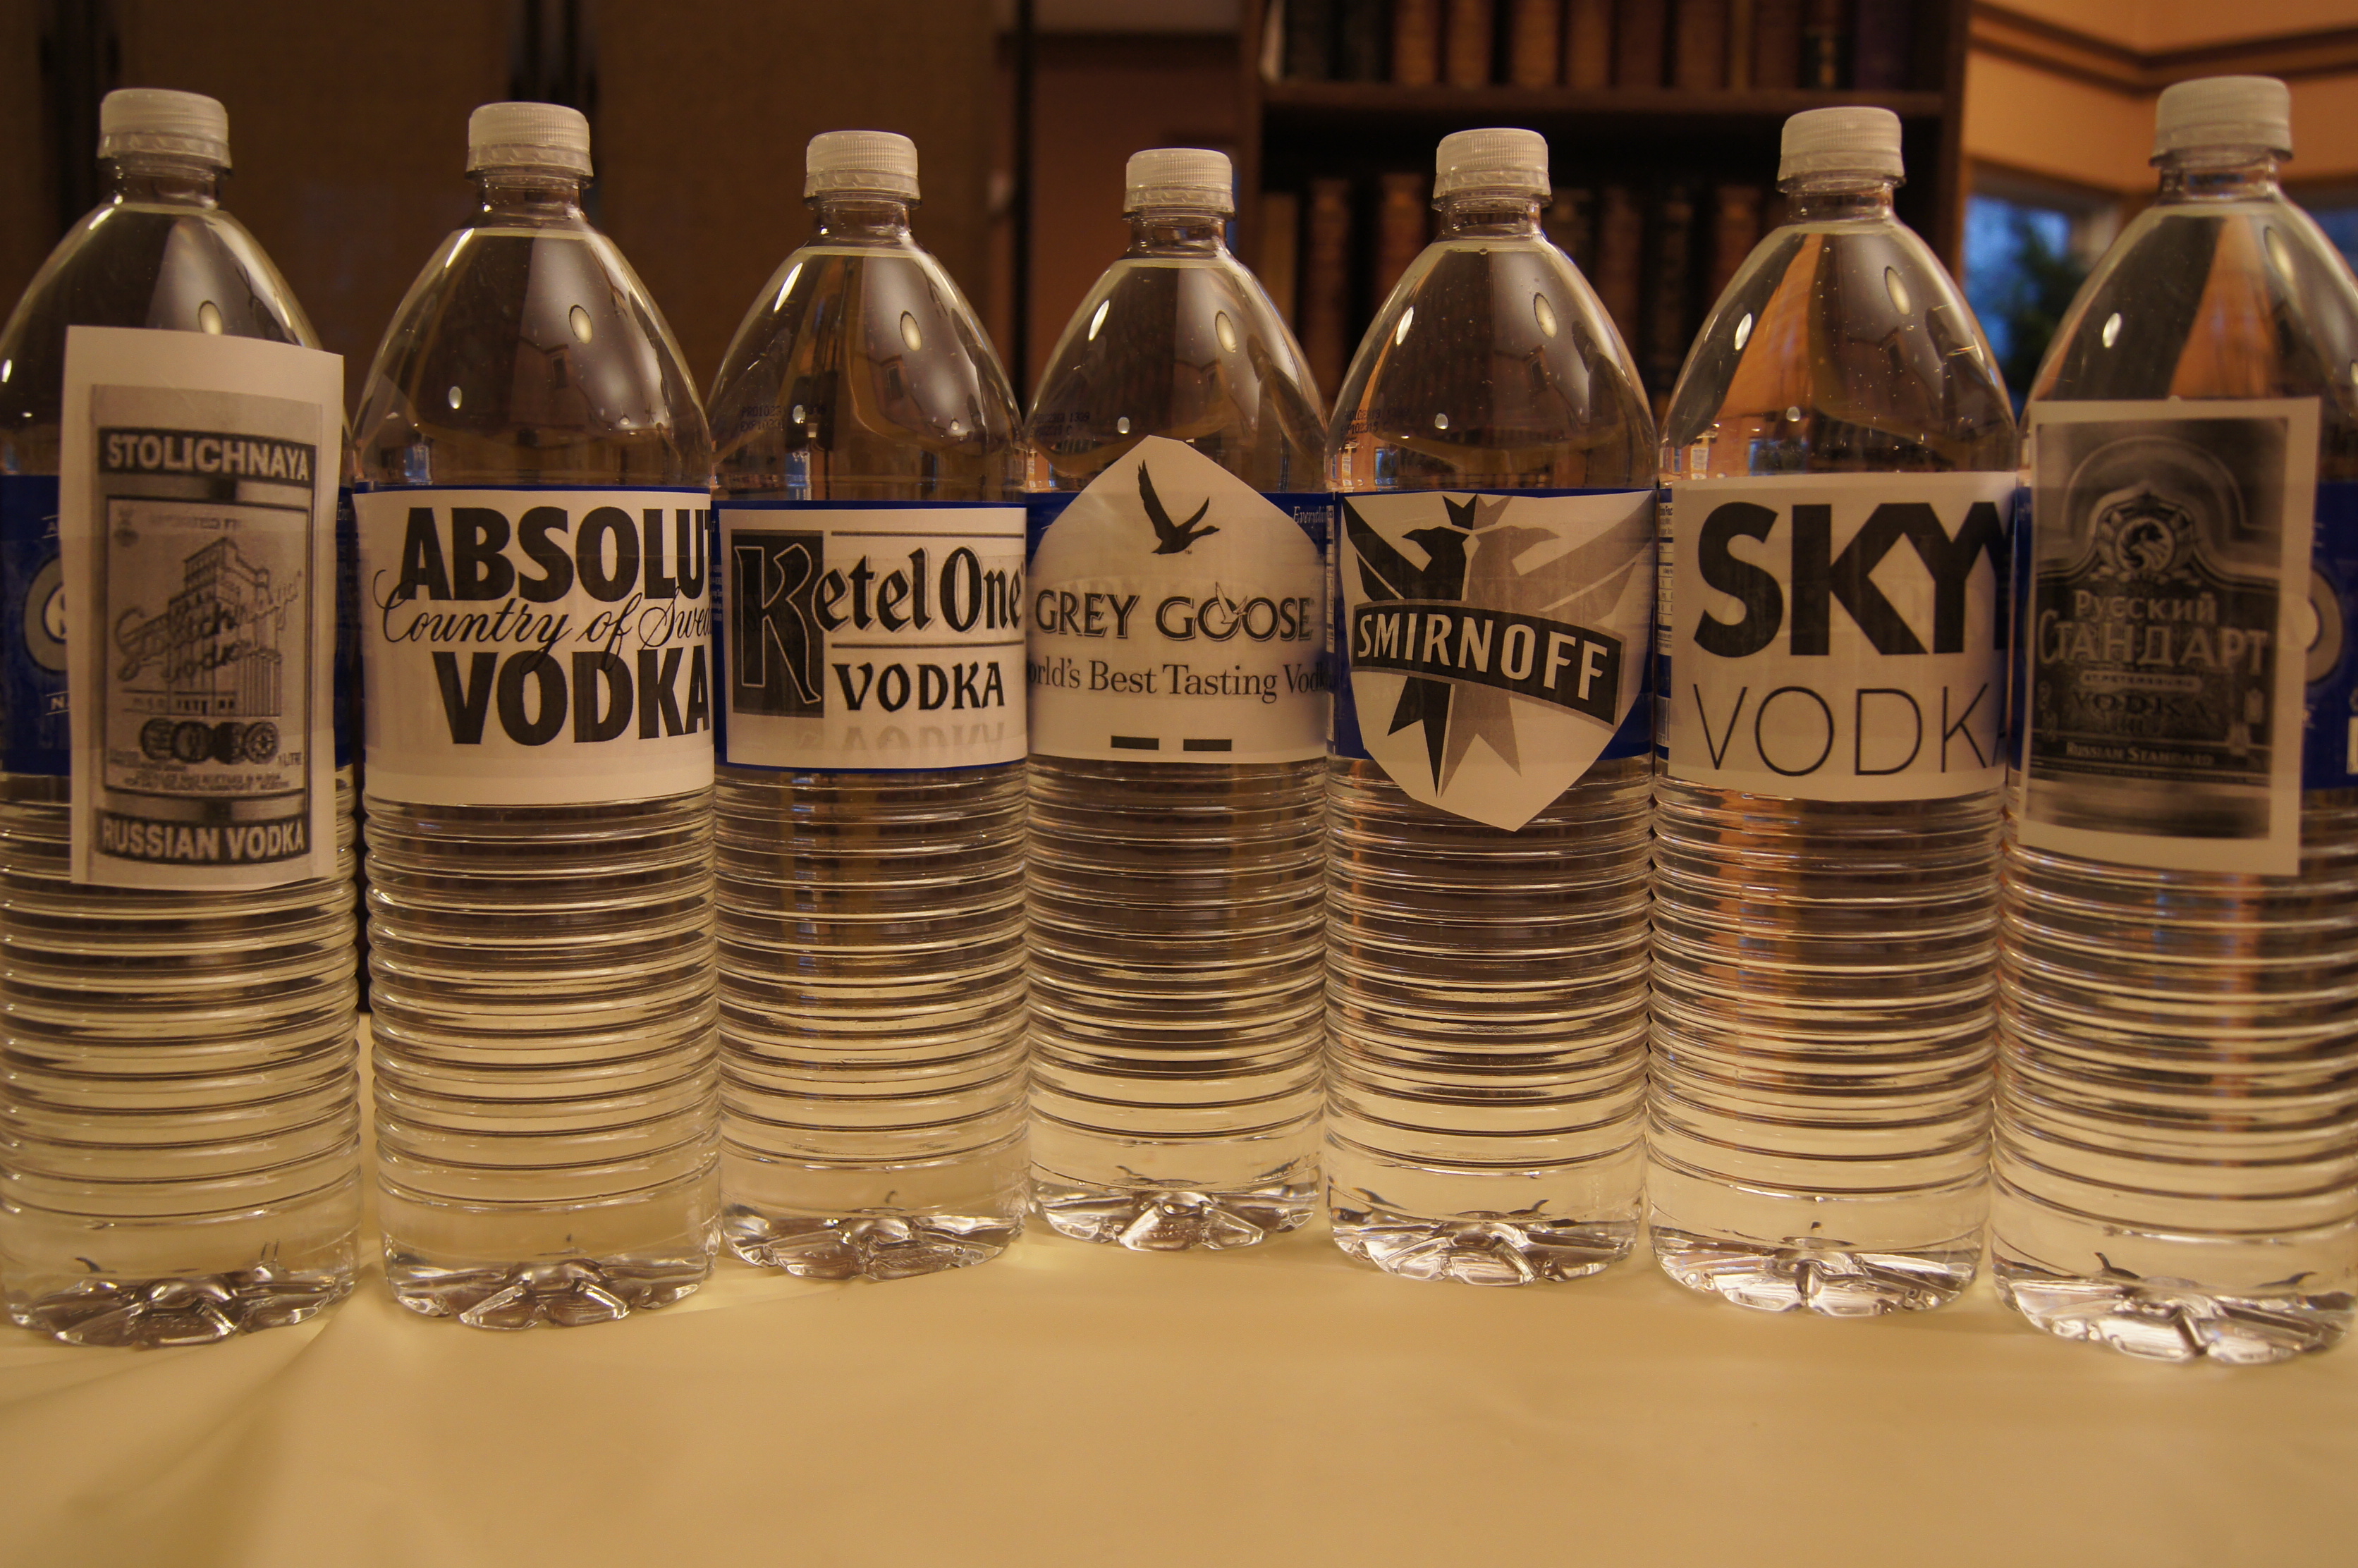 Water Bottles decorated for Yud-Tes Kislev at Shabbos House, as per the Zalman Levine empty vodka bottles story. 